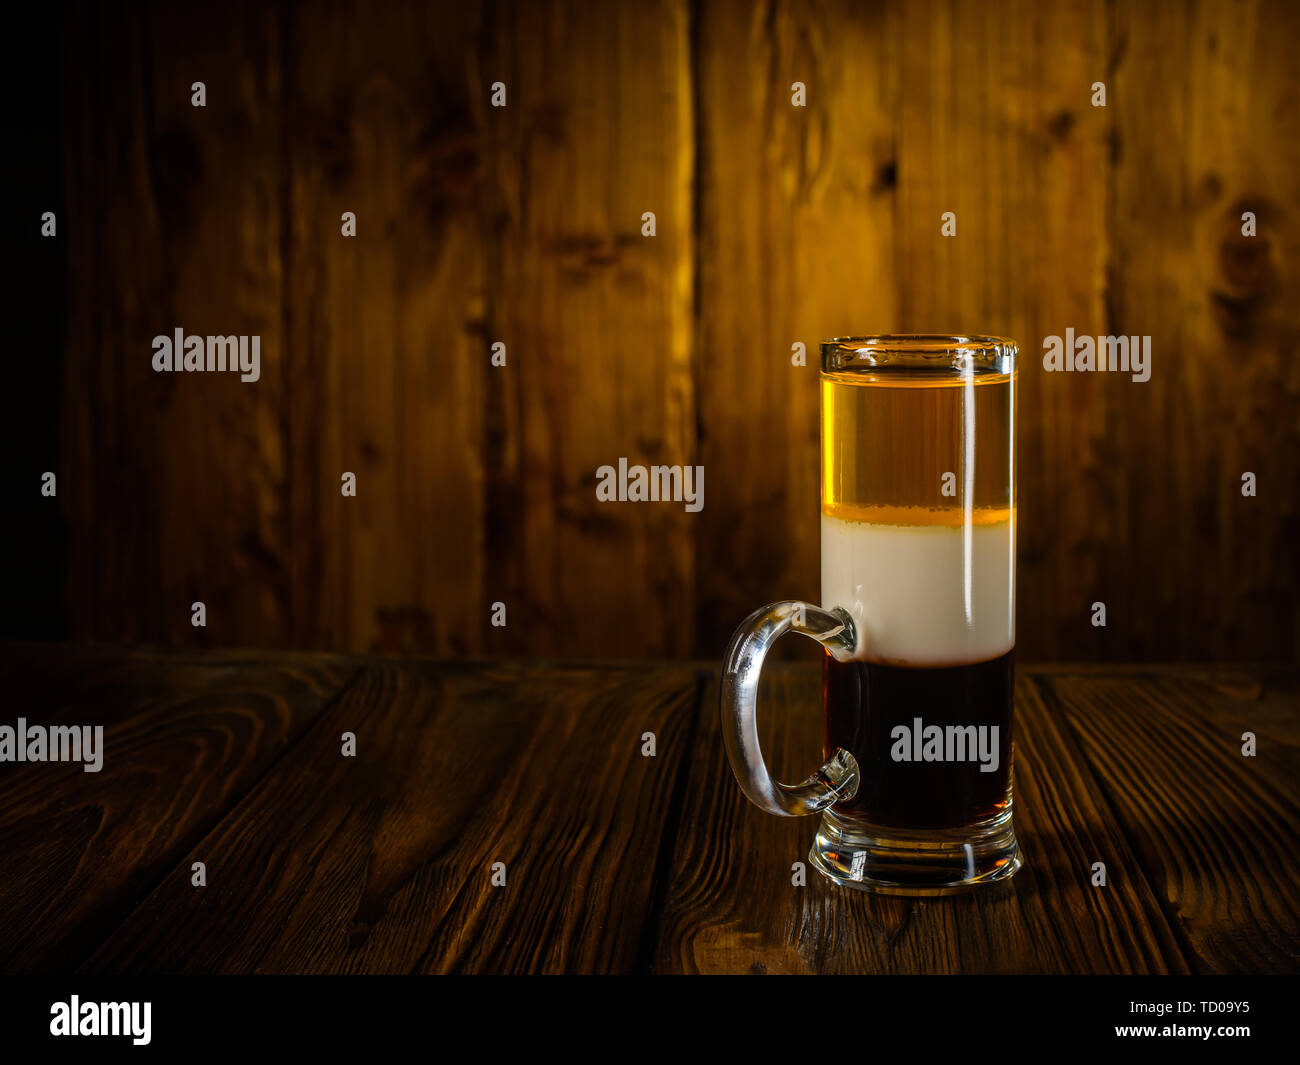 Alcoholic cocktail shot B52 on wooden vintage surface background Stock Photo